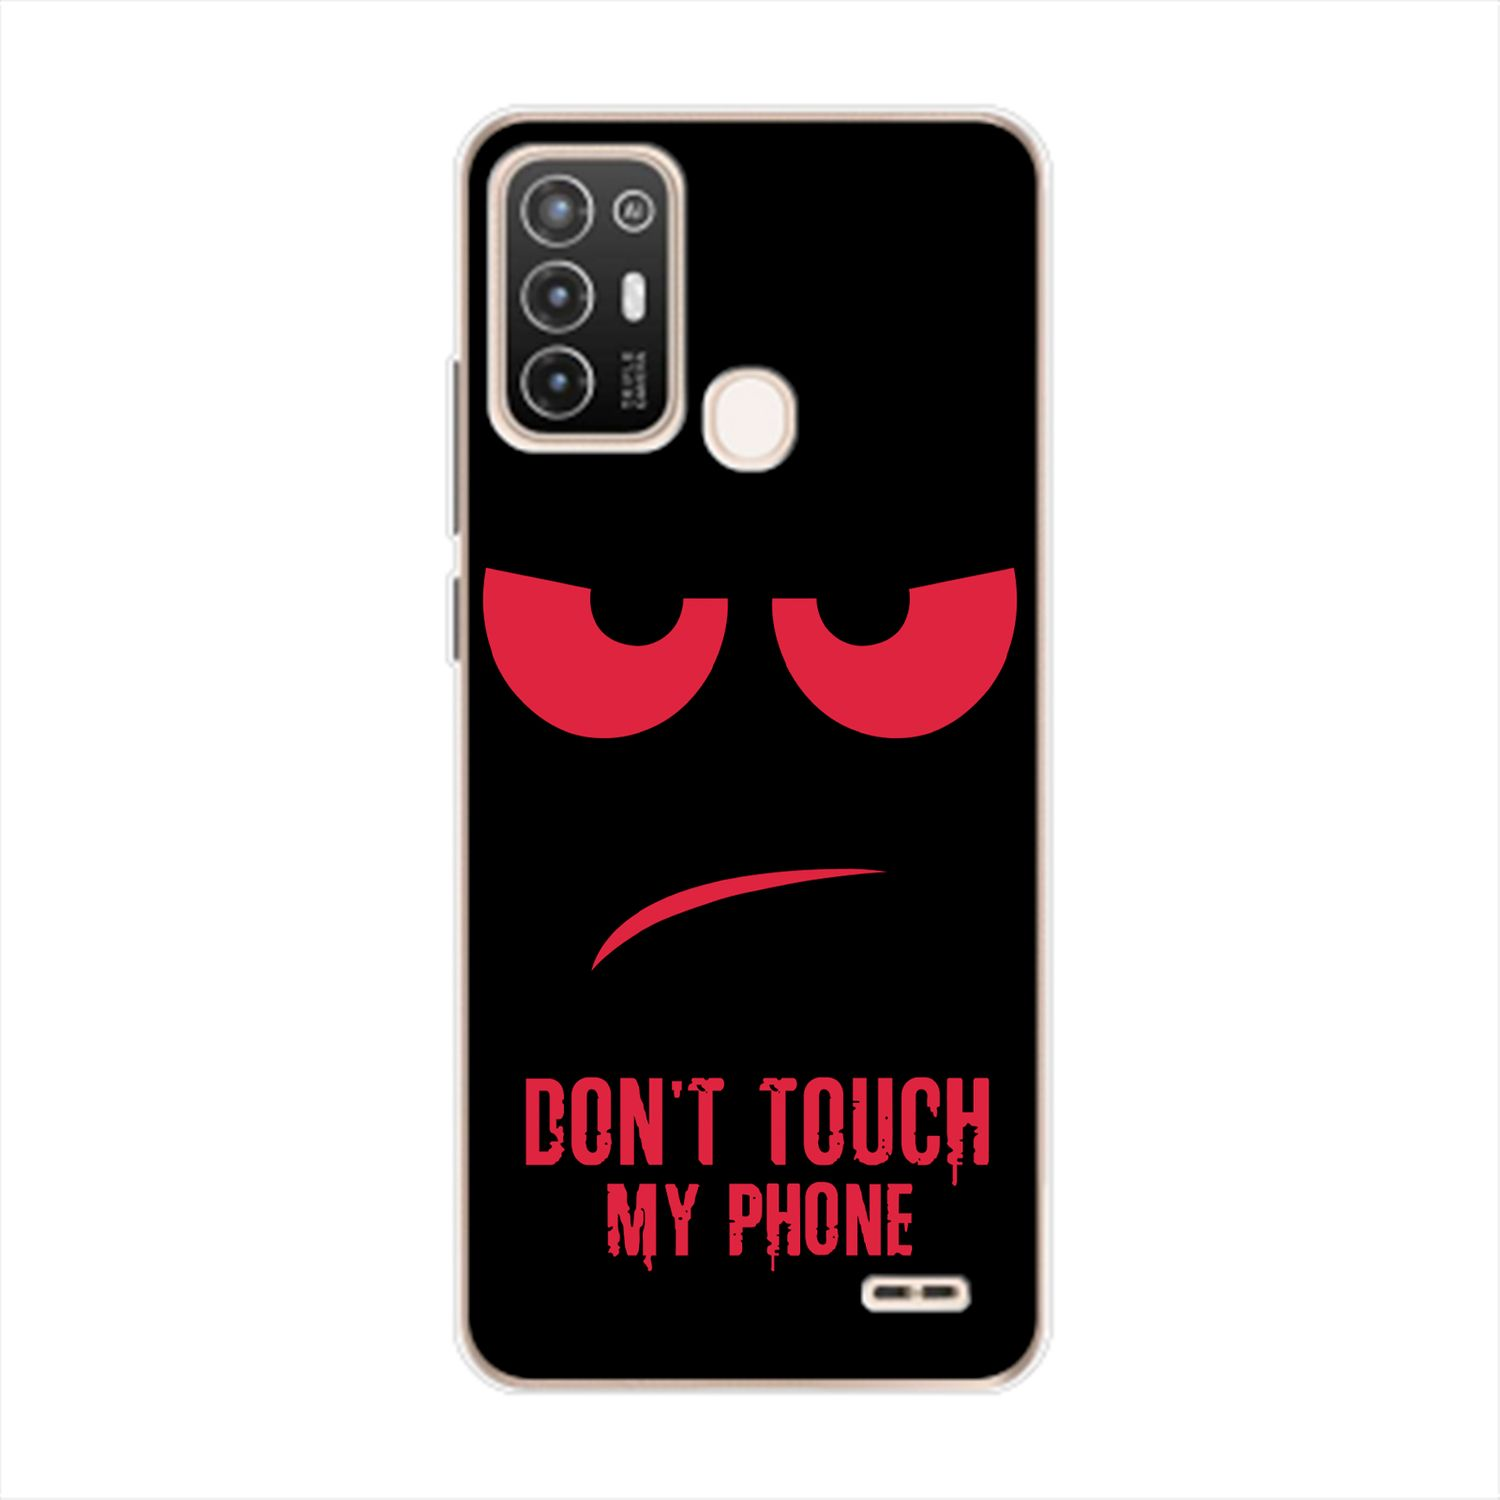 KÖNIG A52, Dont Backcover, My Touch Blade Phone Rot DESIGN Case, ZTE,